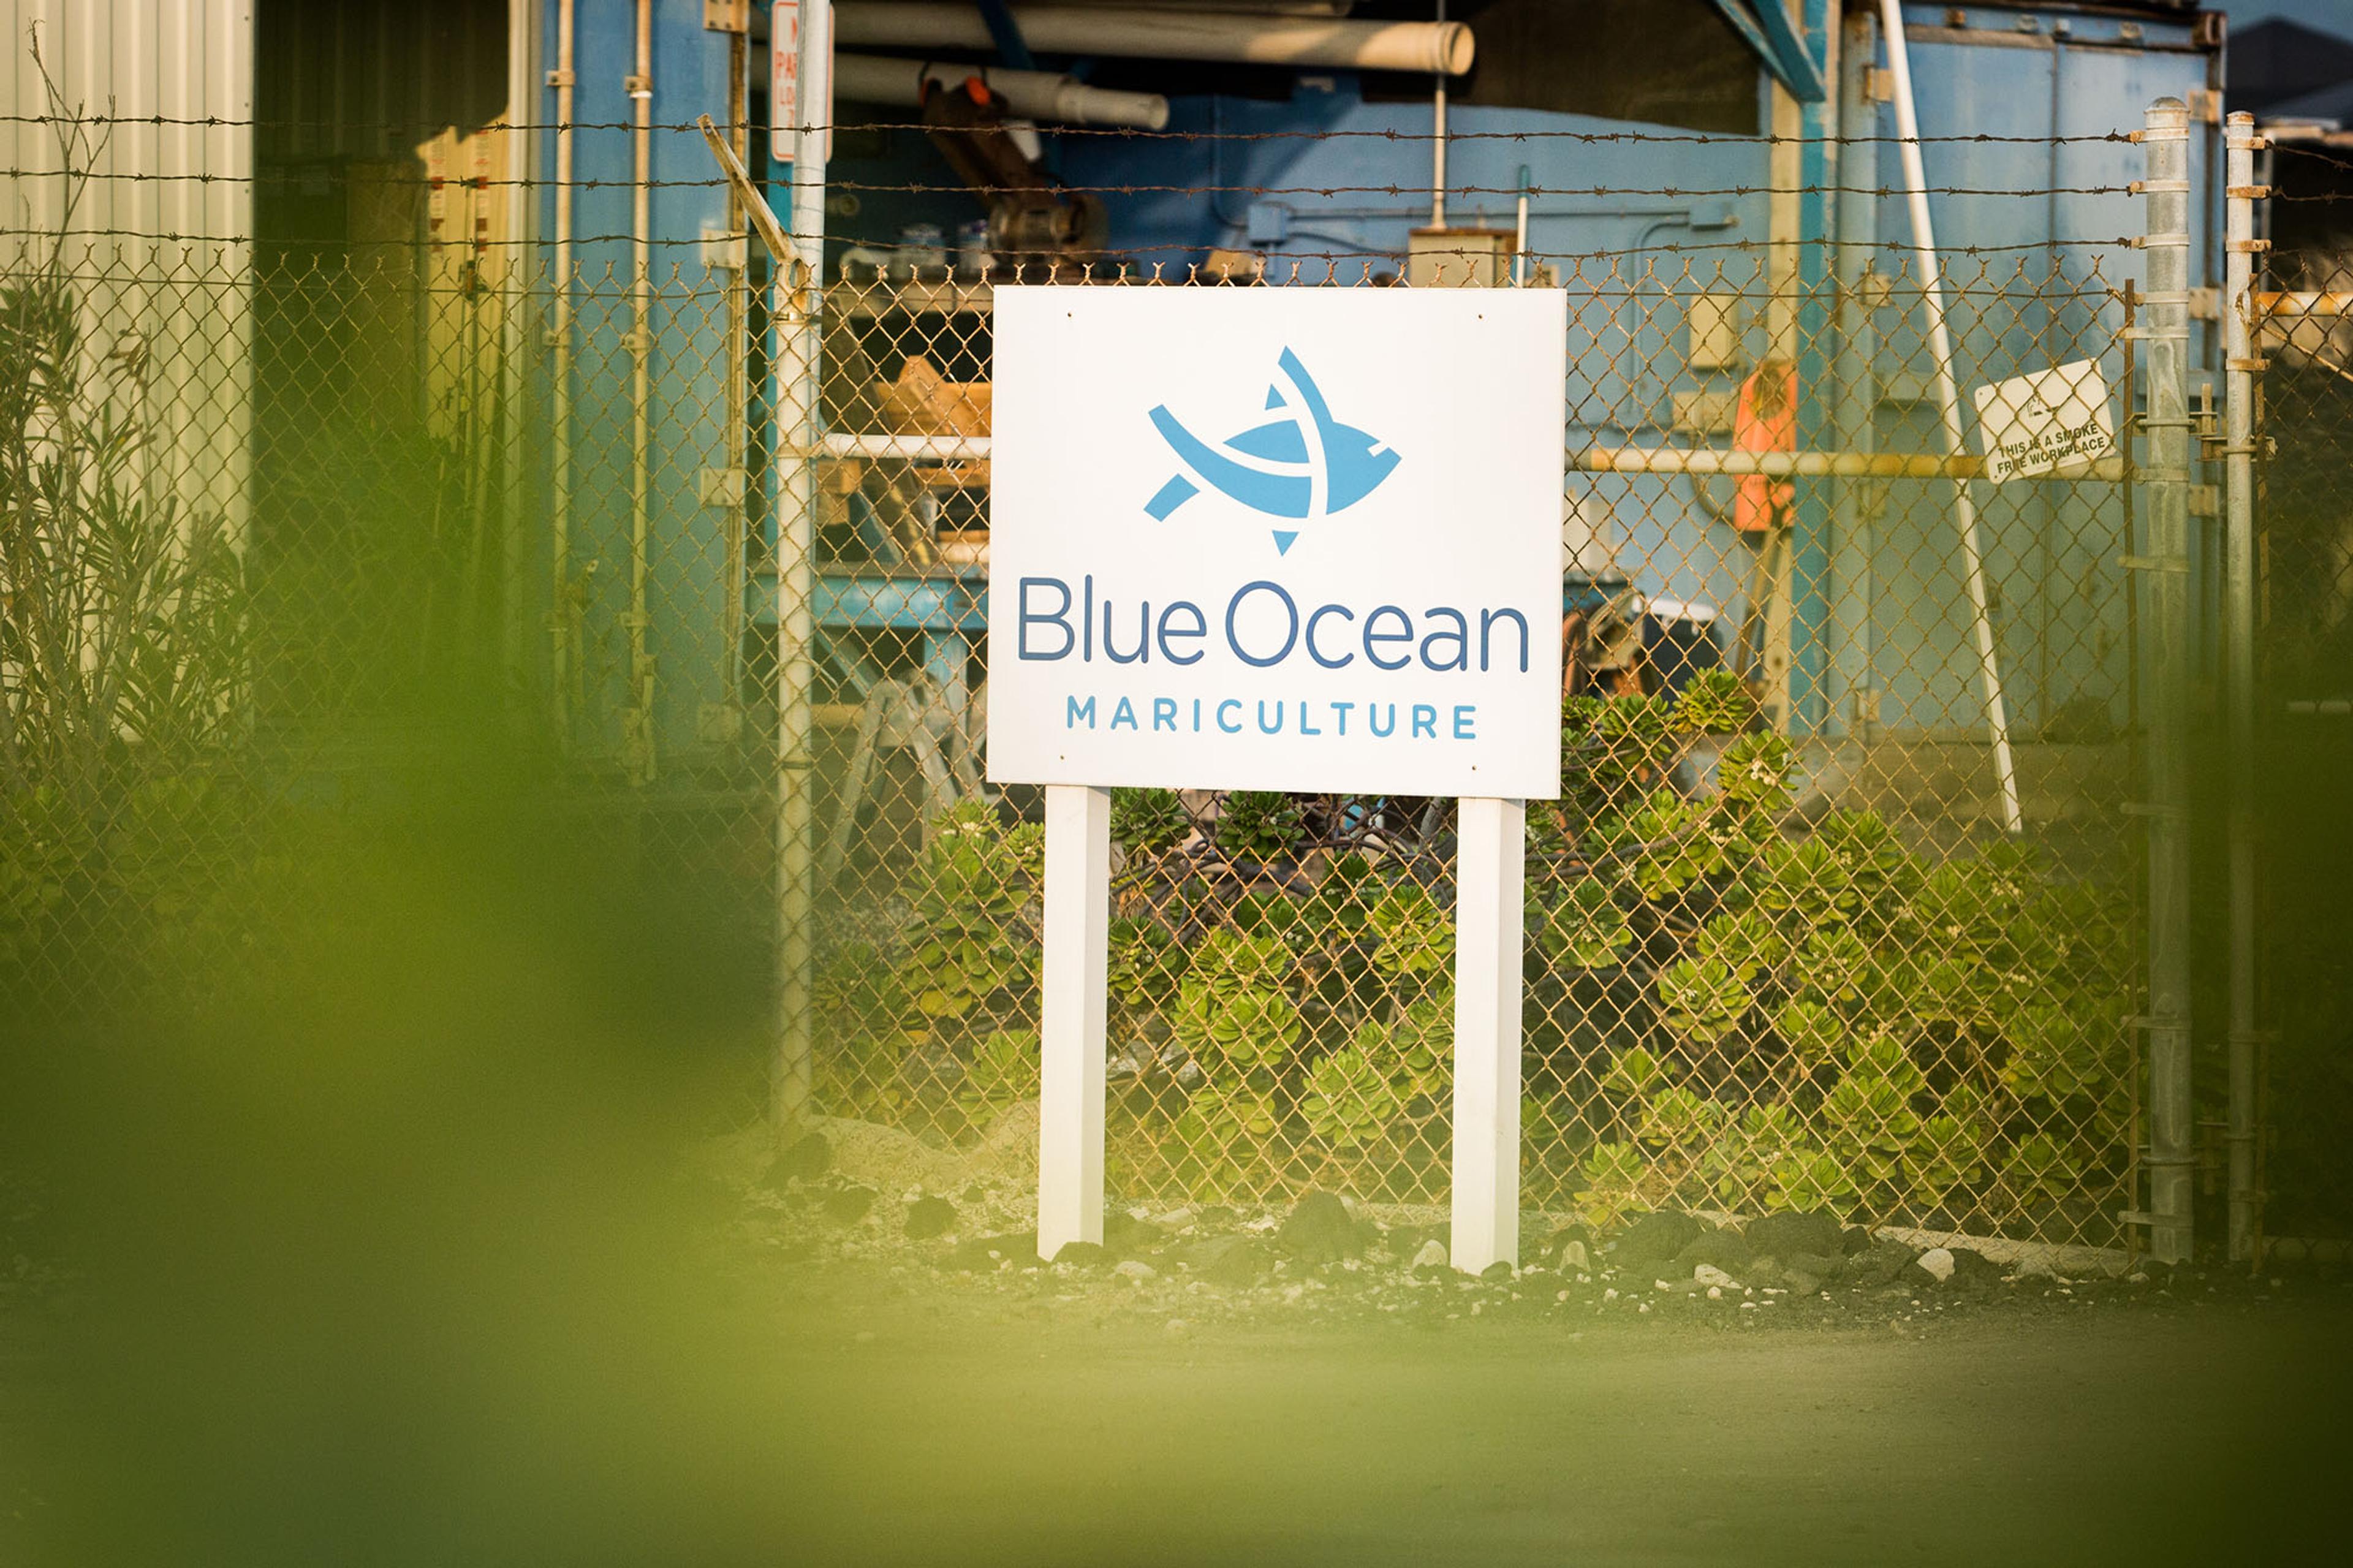 A Blue Ocean Mariculture sign outside the fishery building.